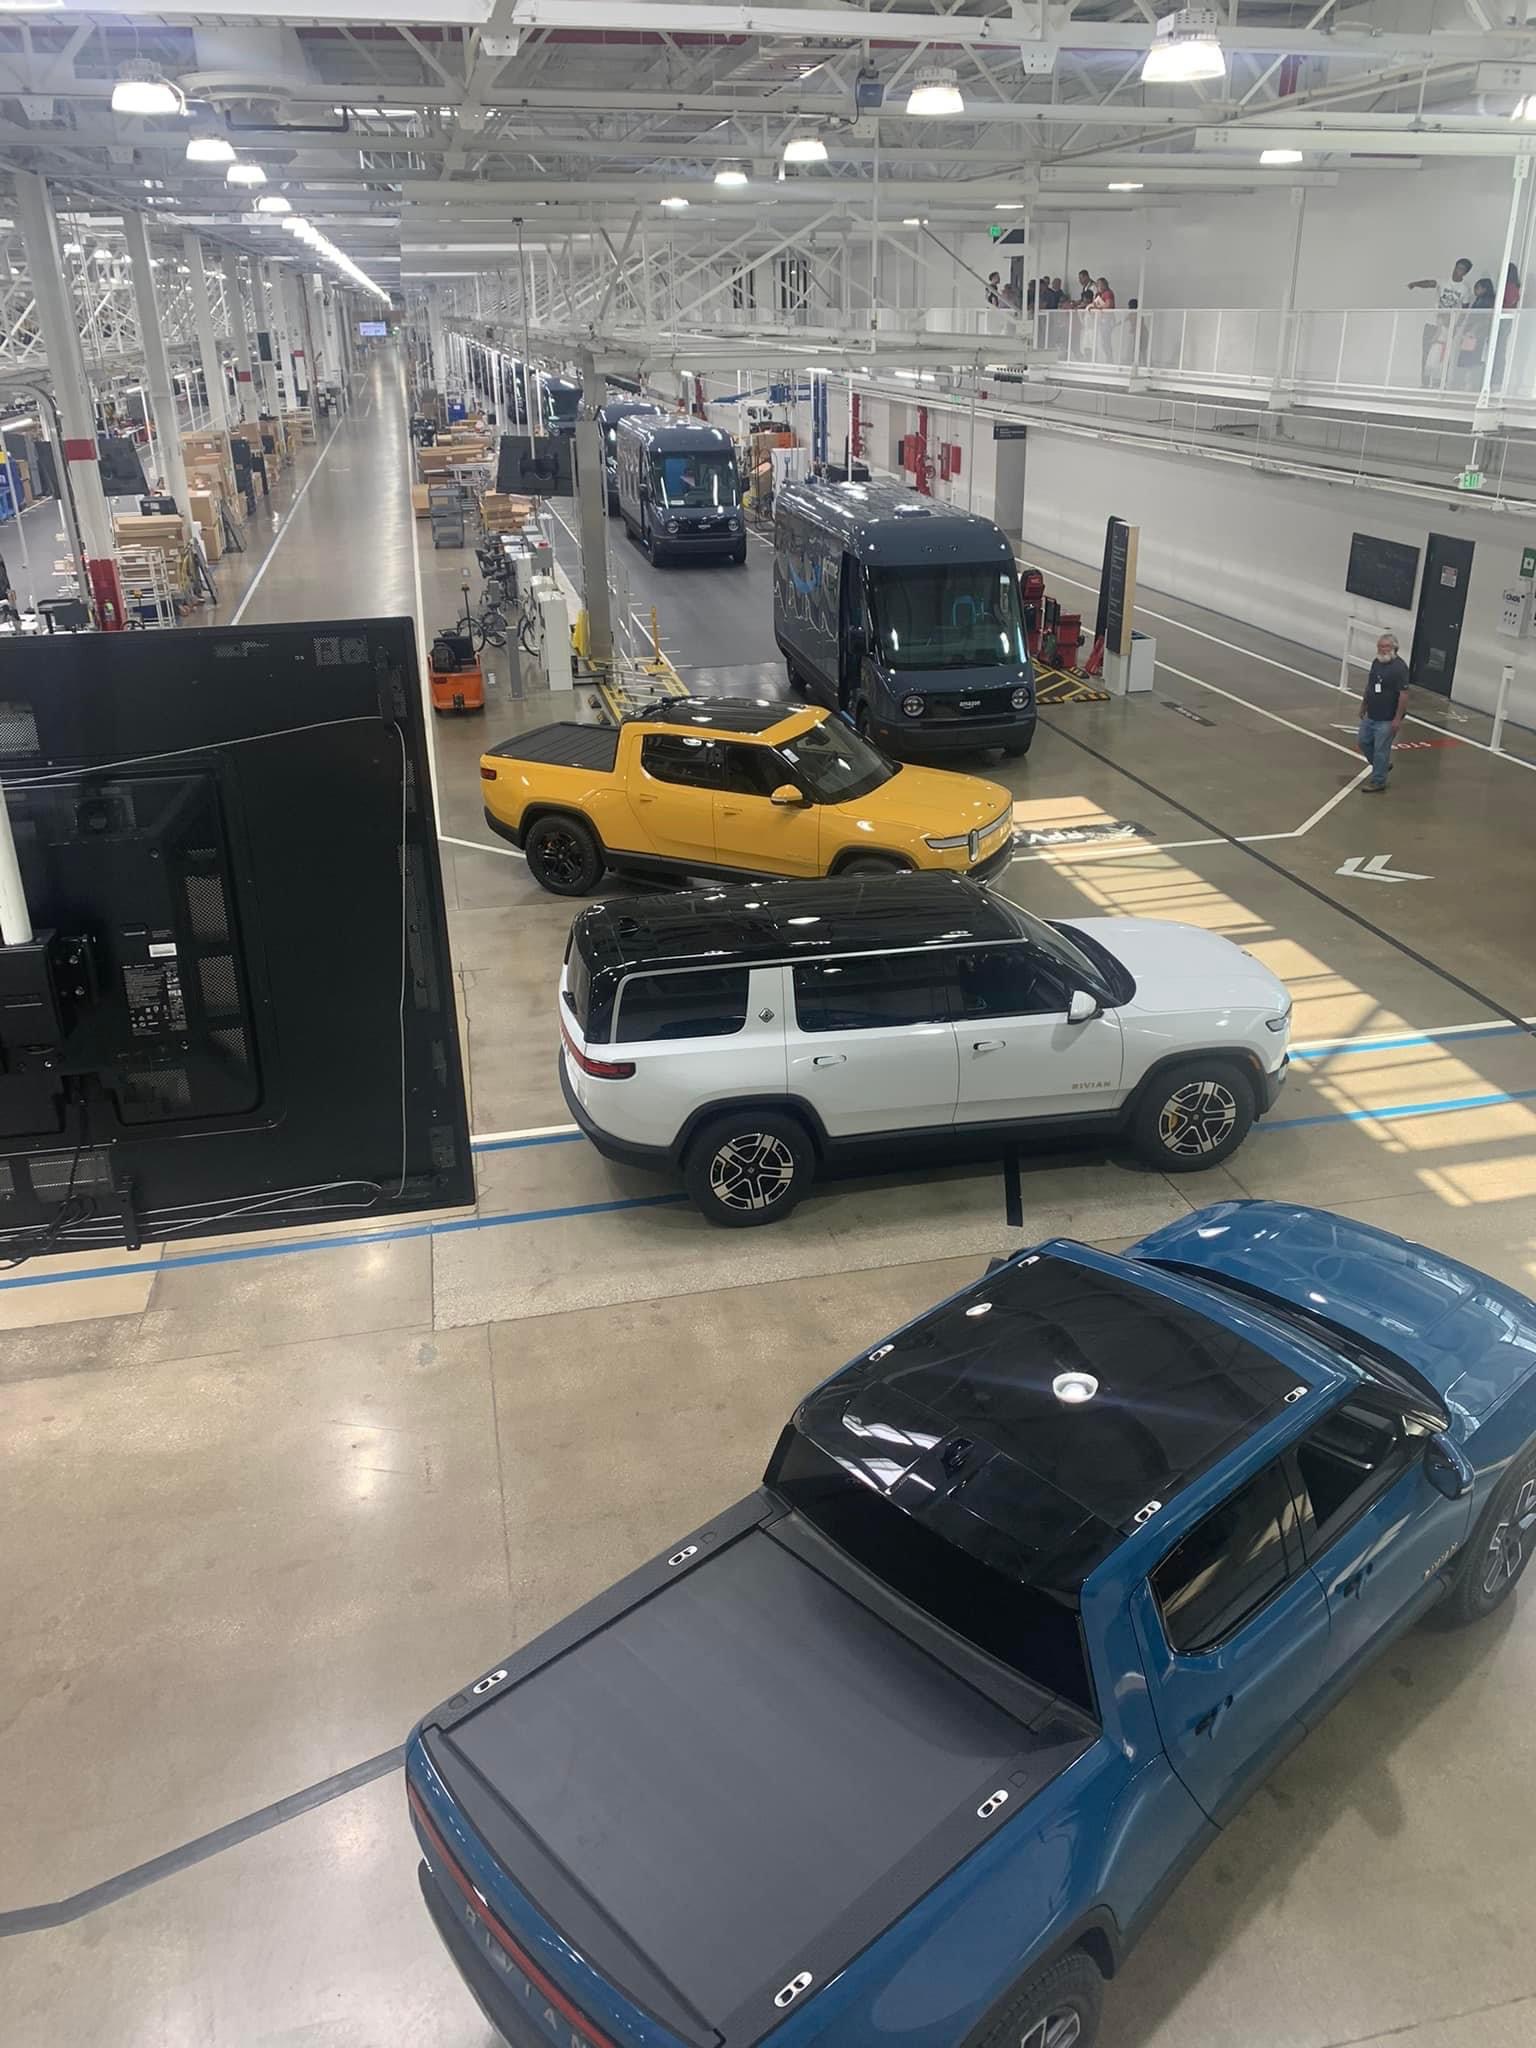 Rivian R1T R1S Tons of Rivians & Amazon Vans ready to ship... photos [removed at request of Rivian] C6CC66E9-0100-47ED-8E65-1D30C3D21BBA